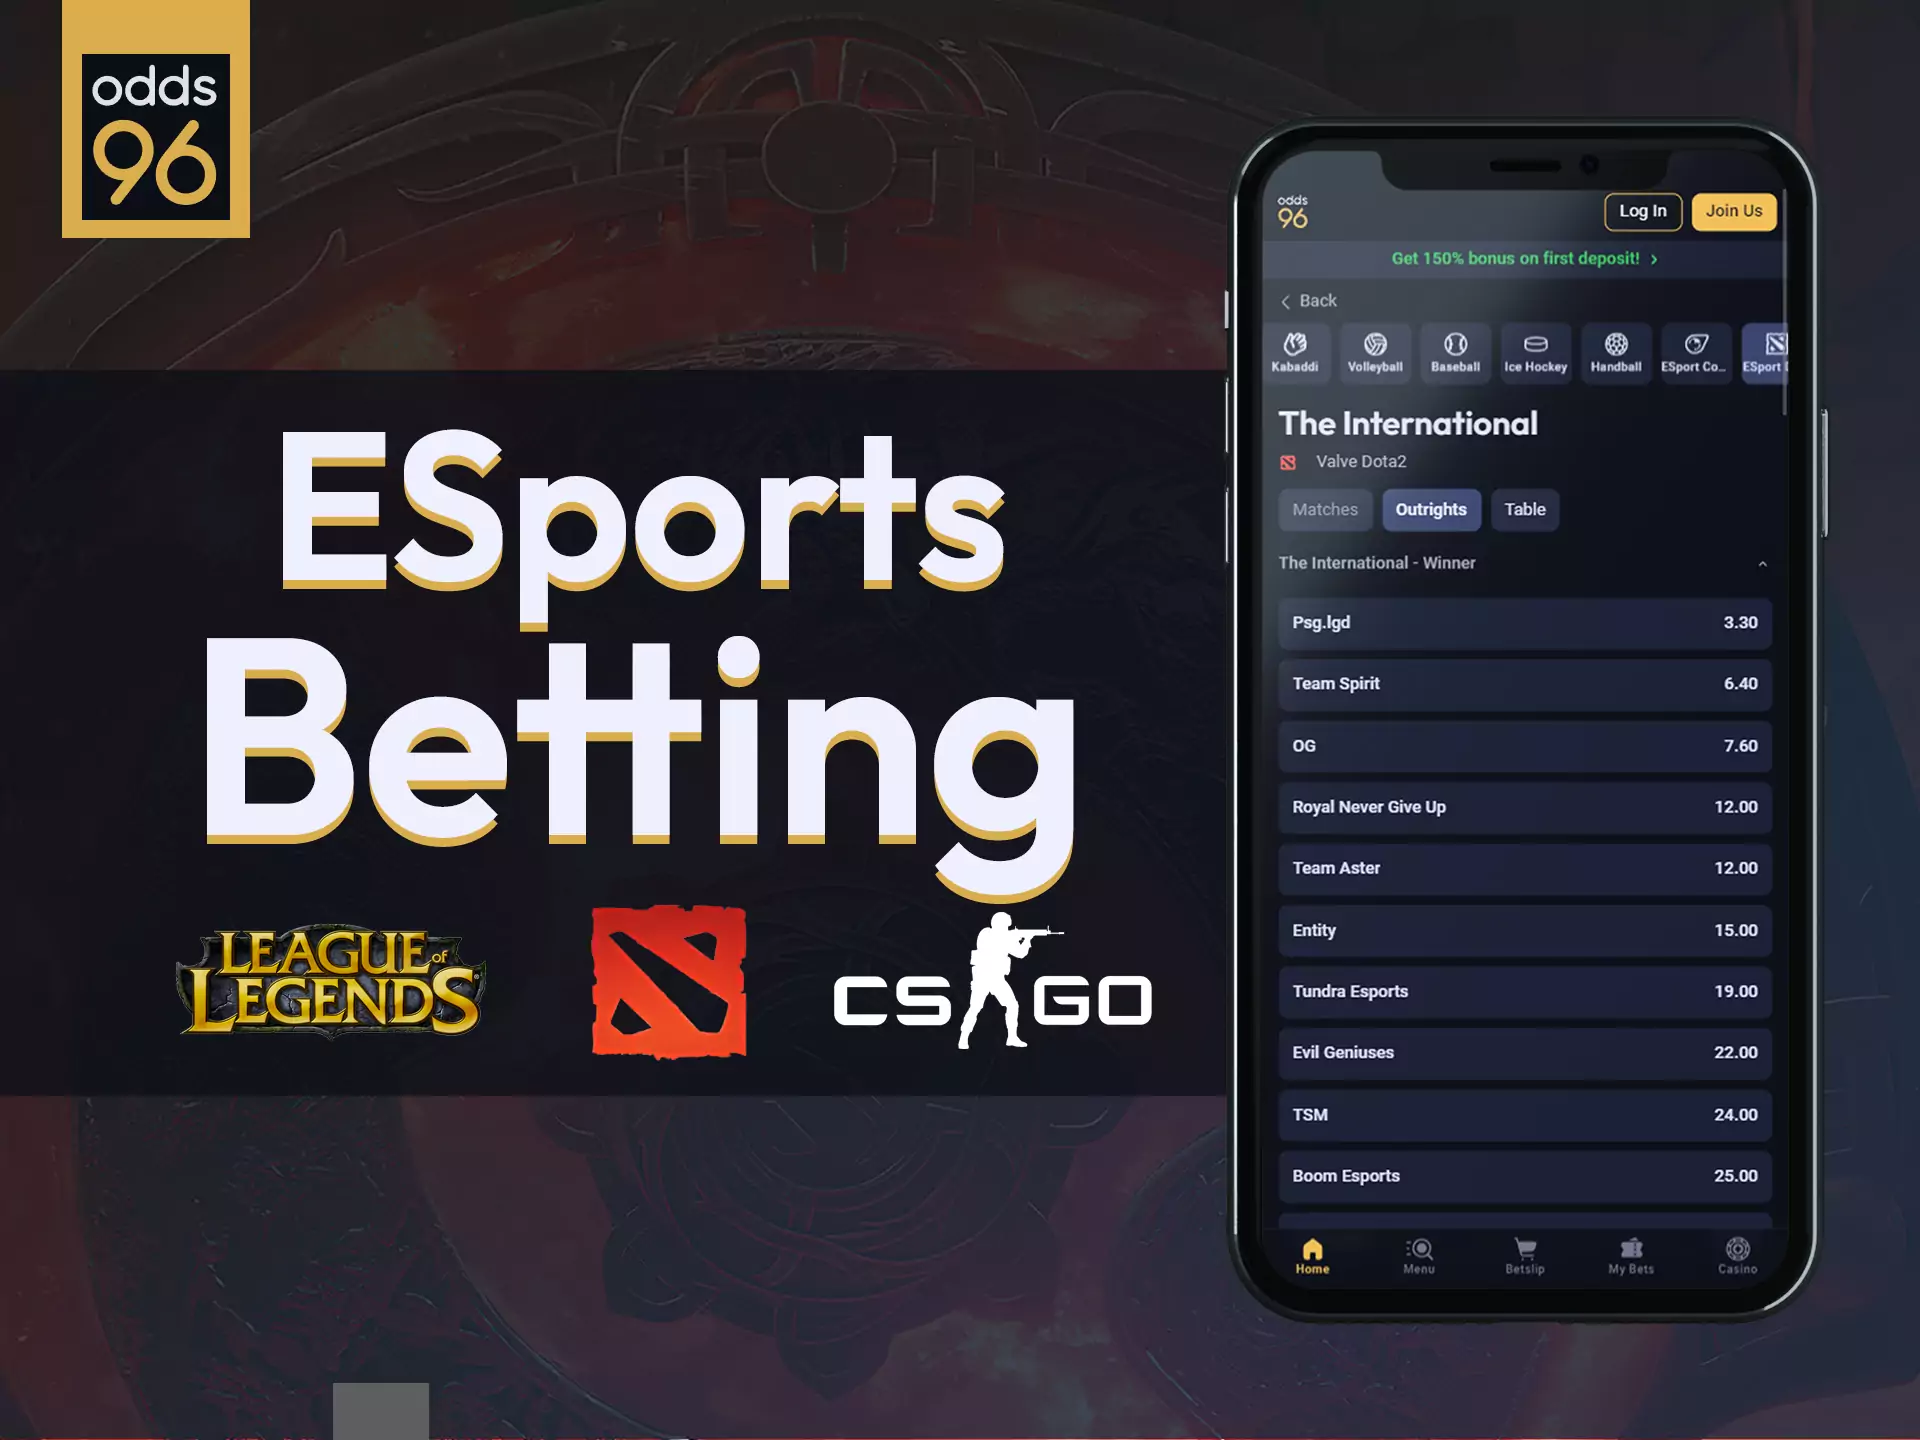 Place bets on esports and win with Odds96.